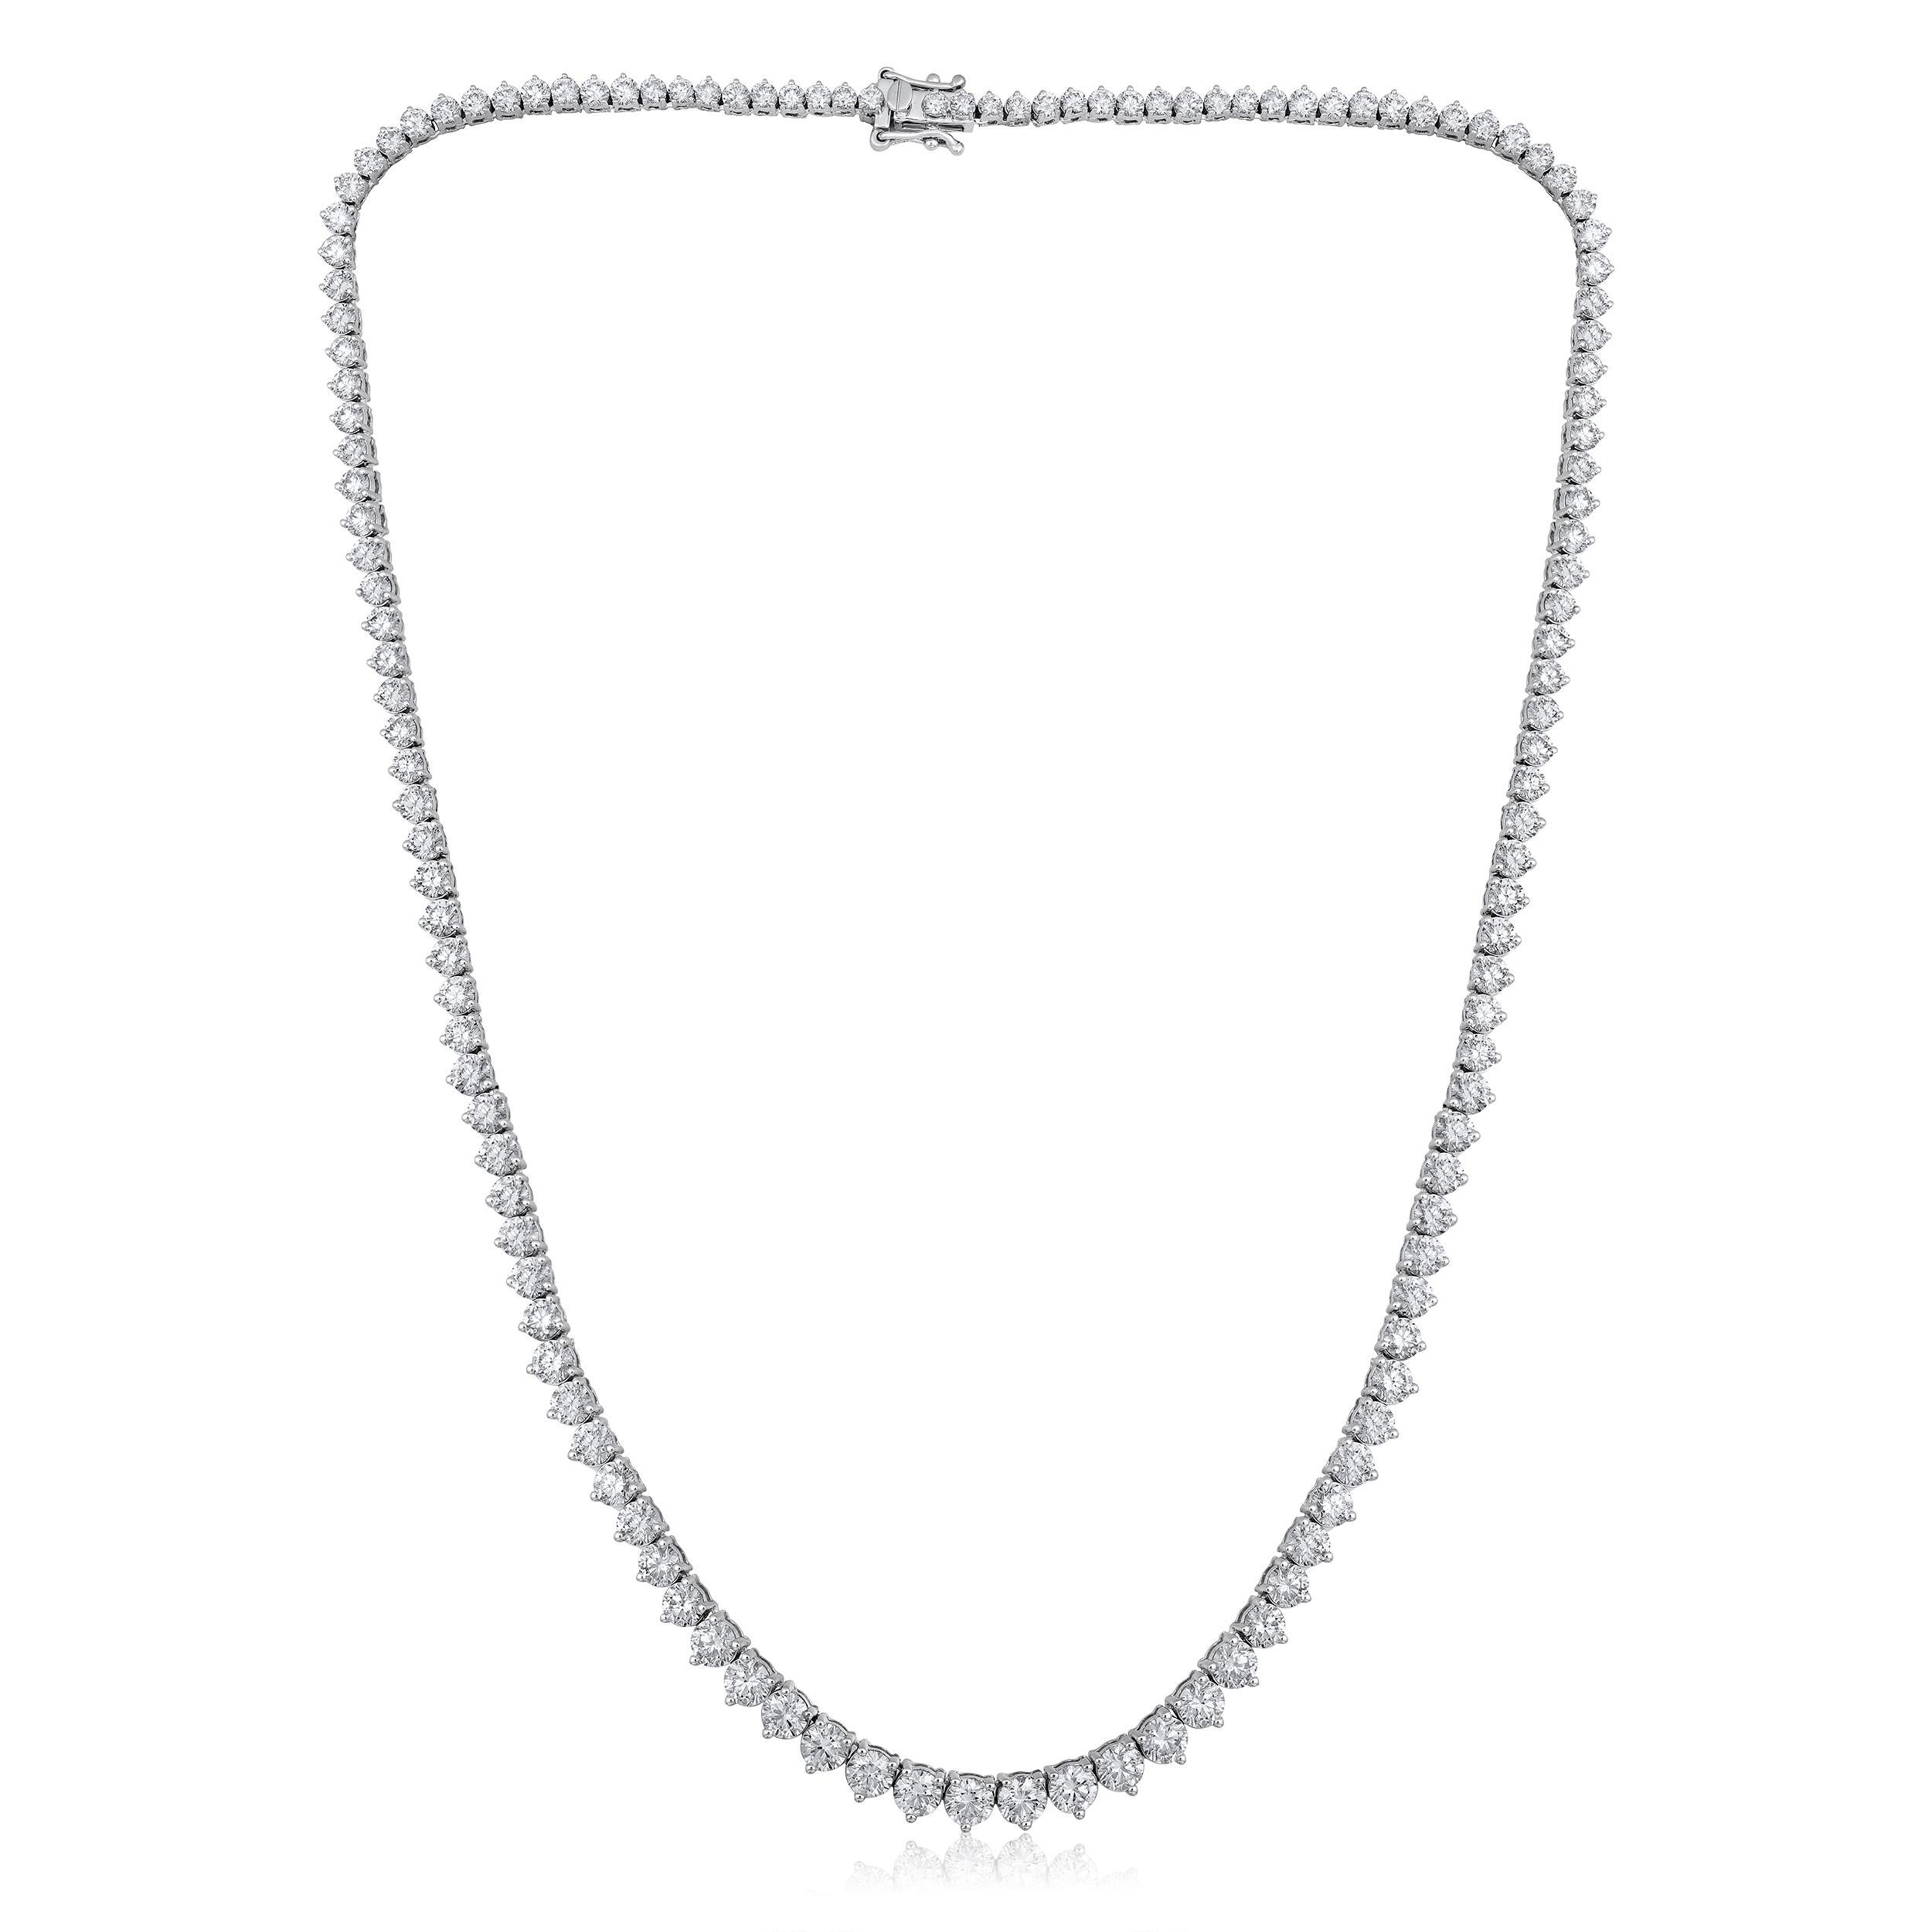 Crafted in 20.81 grams of 14K White Gold, the necklace contains 135 stones of Round Diamonds with a total of 14.5 carat in G-H color and VS-SI carat. The necklace length is 16 inches.

CONTEMPORARY AND TIMELESS ESSENCE: Crafted in 14-karat/18-karat